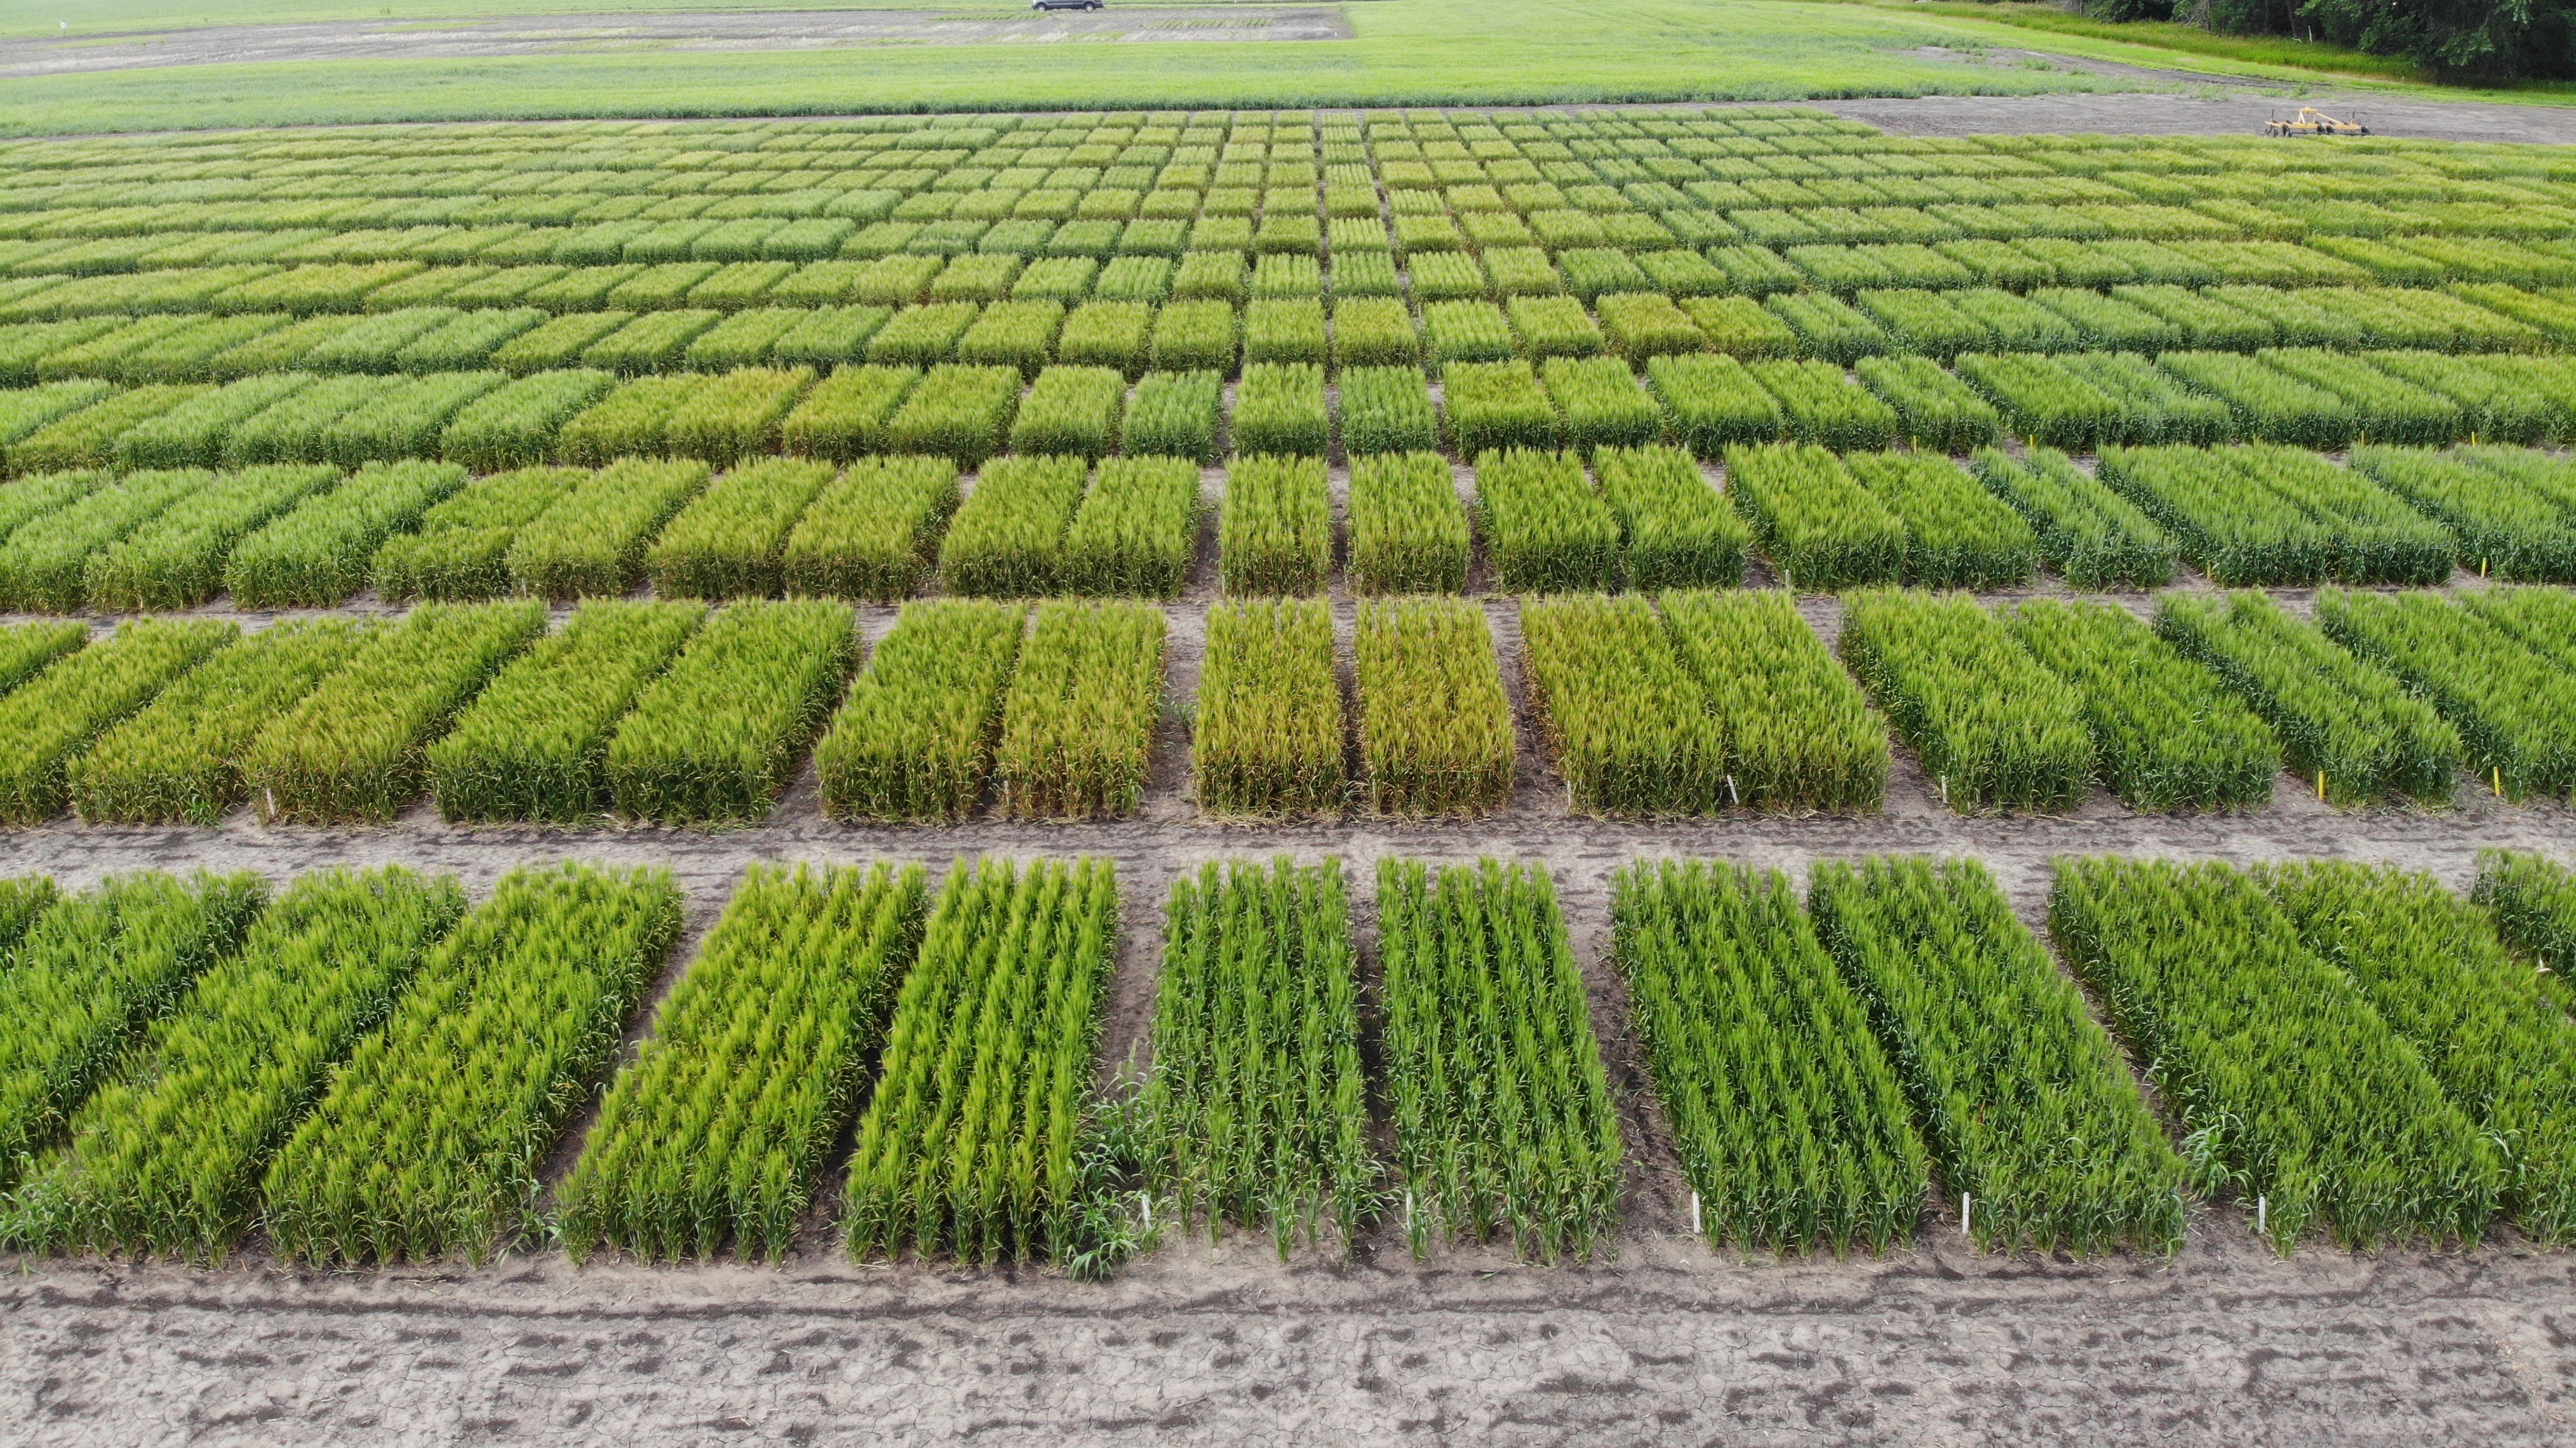 The data in the selection guides comes from variety trials conducted across the state by NDSU Research Extension Centers and main station breeding and agronomy programs. (NDSU photo)